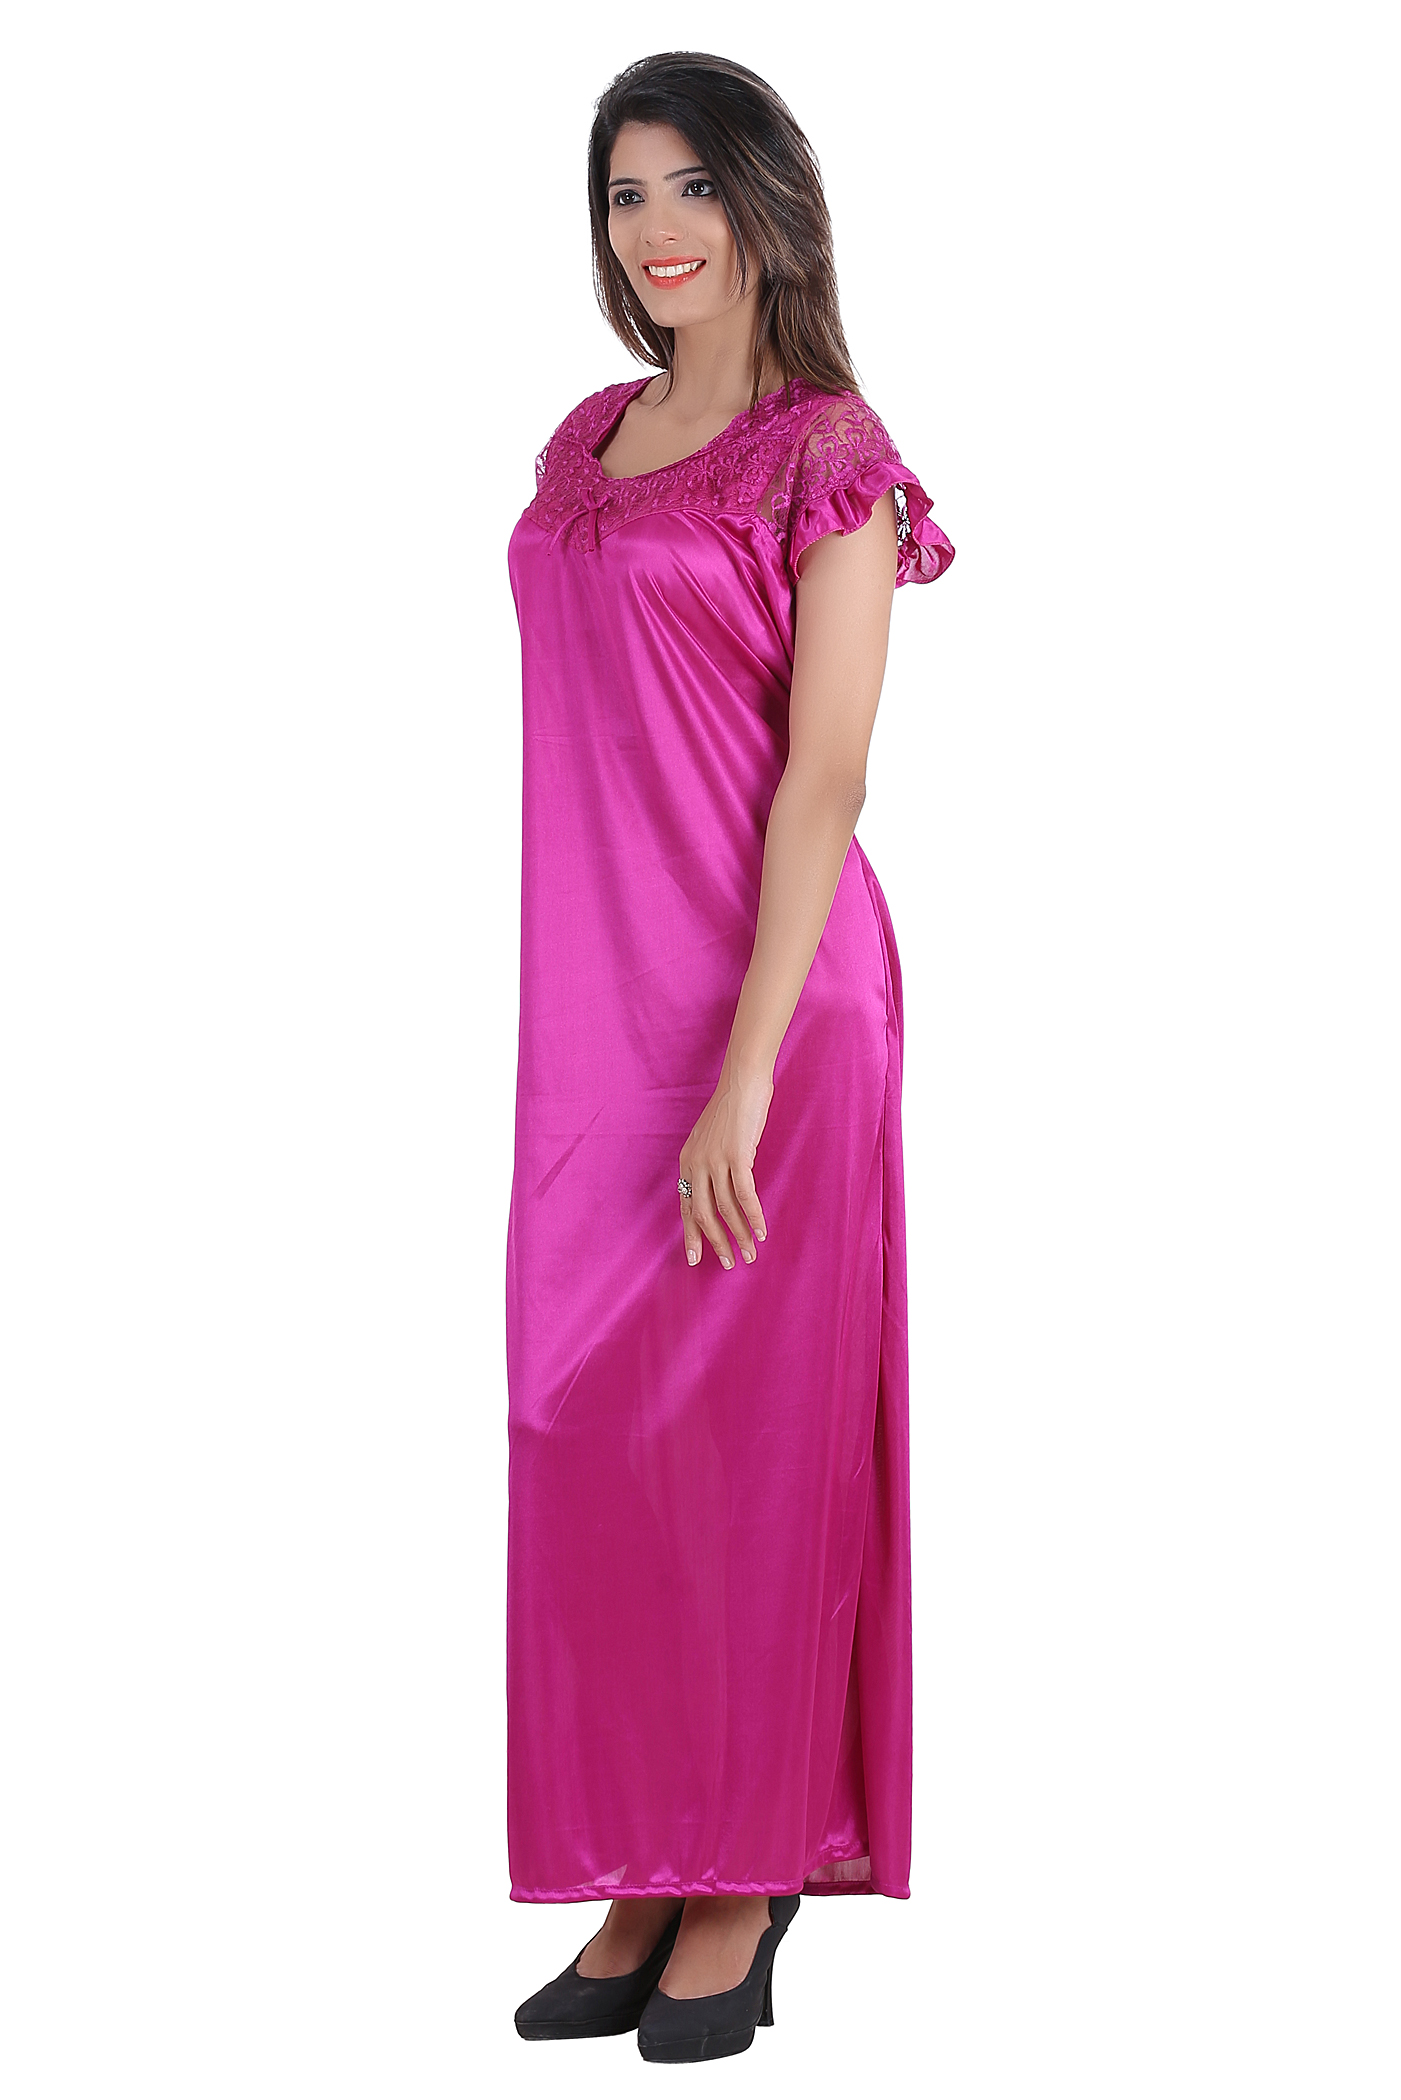 Buy Glossia Pink Satin Nighty And Night Gowns Online ₹399 From Shopclues 